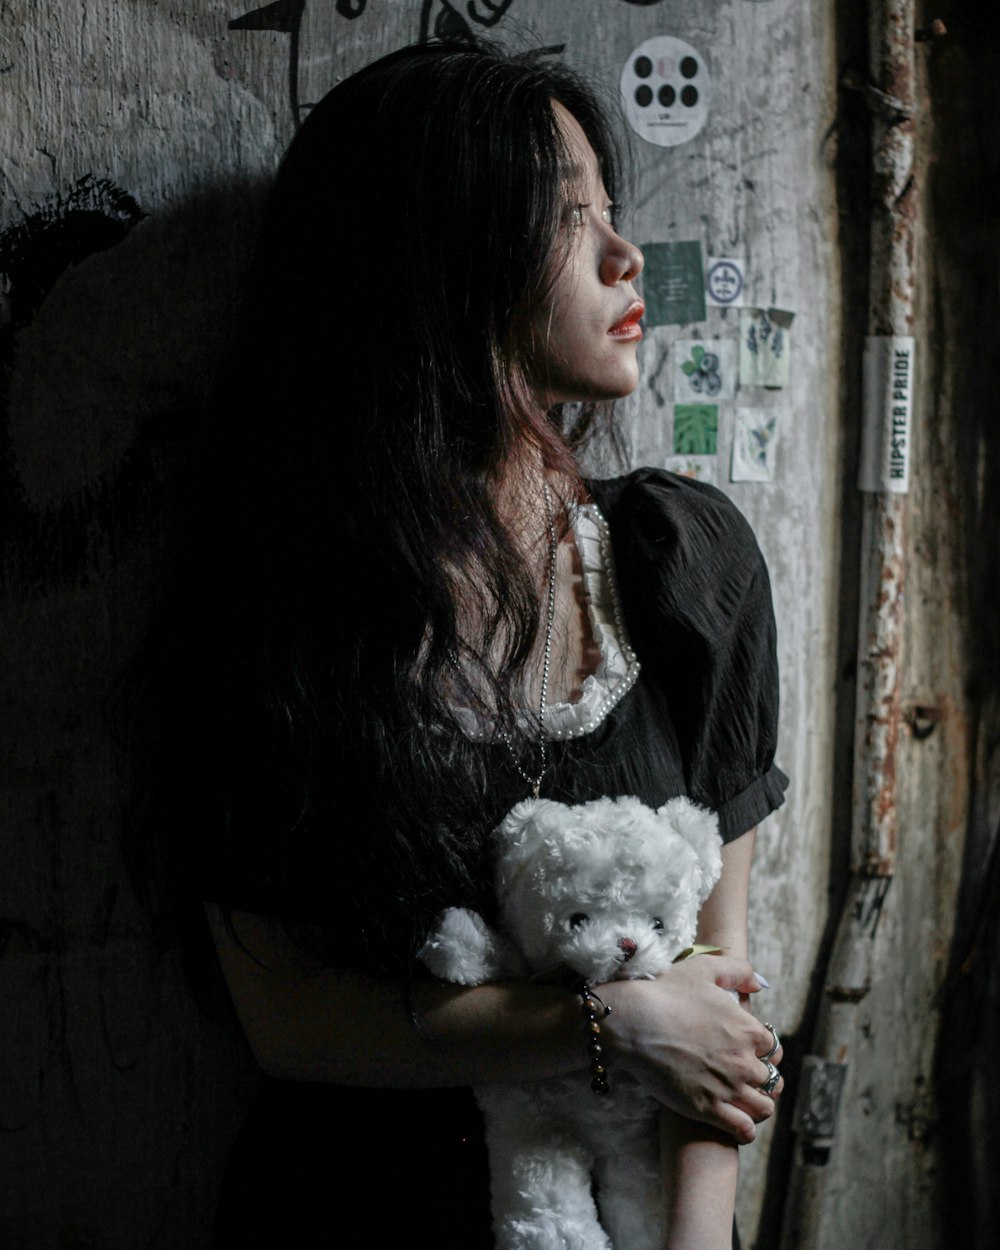 a woman in a black dress holding a white teddy bear